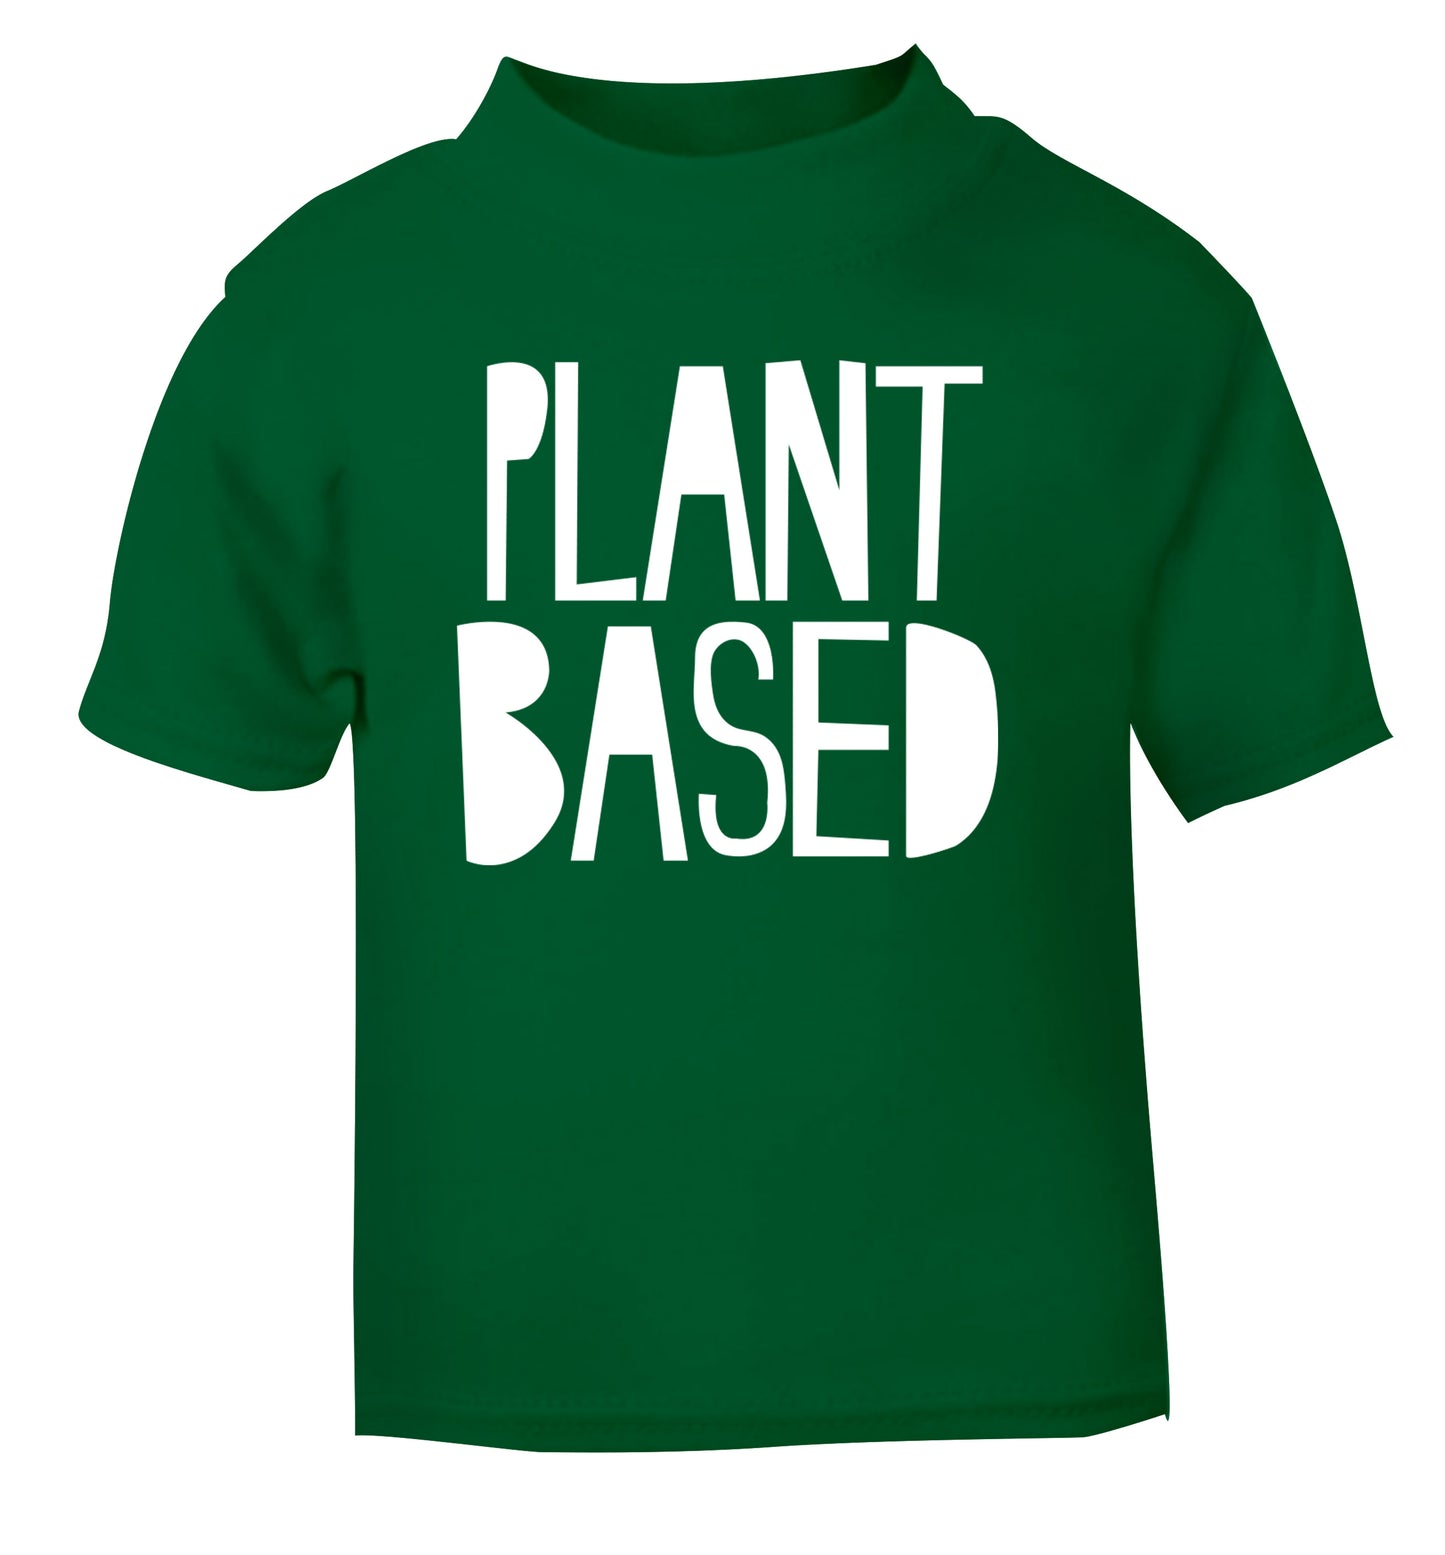 Plant Based green Baby Toddler Tshirt 2 Years